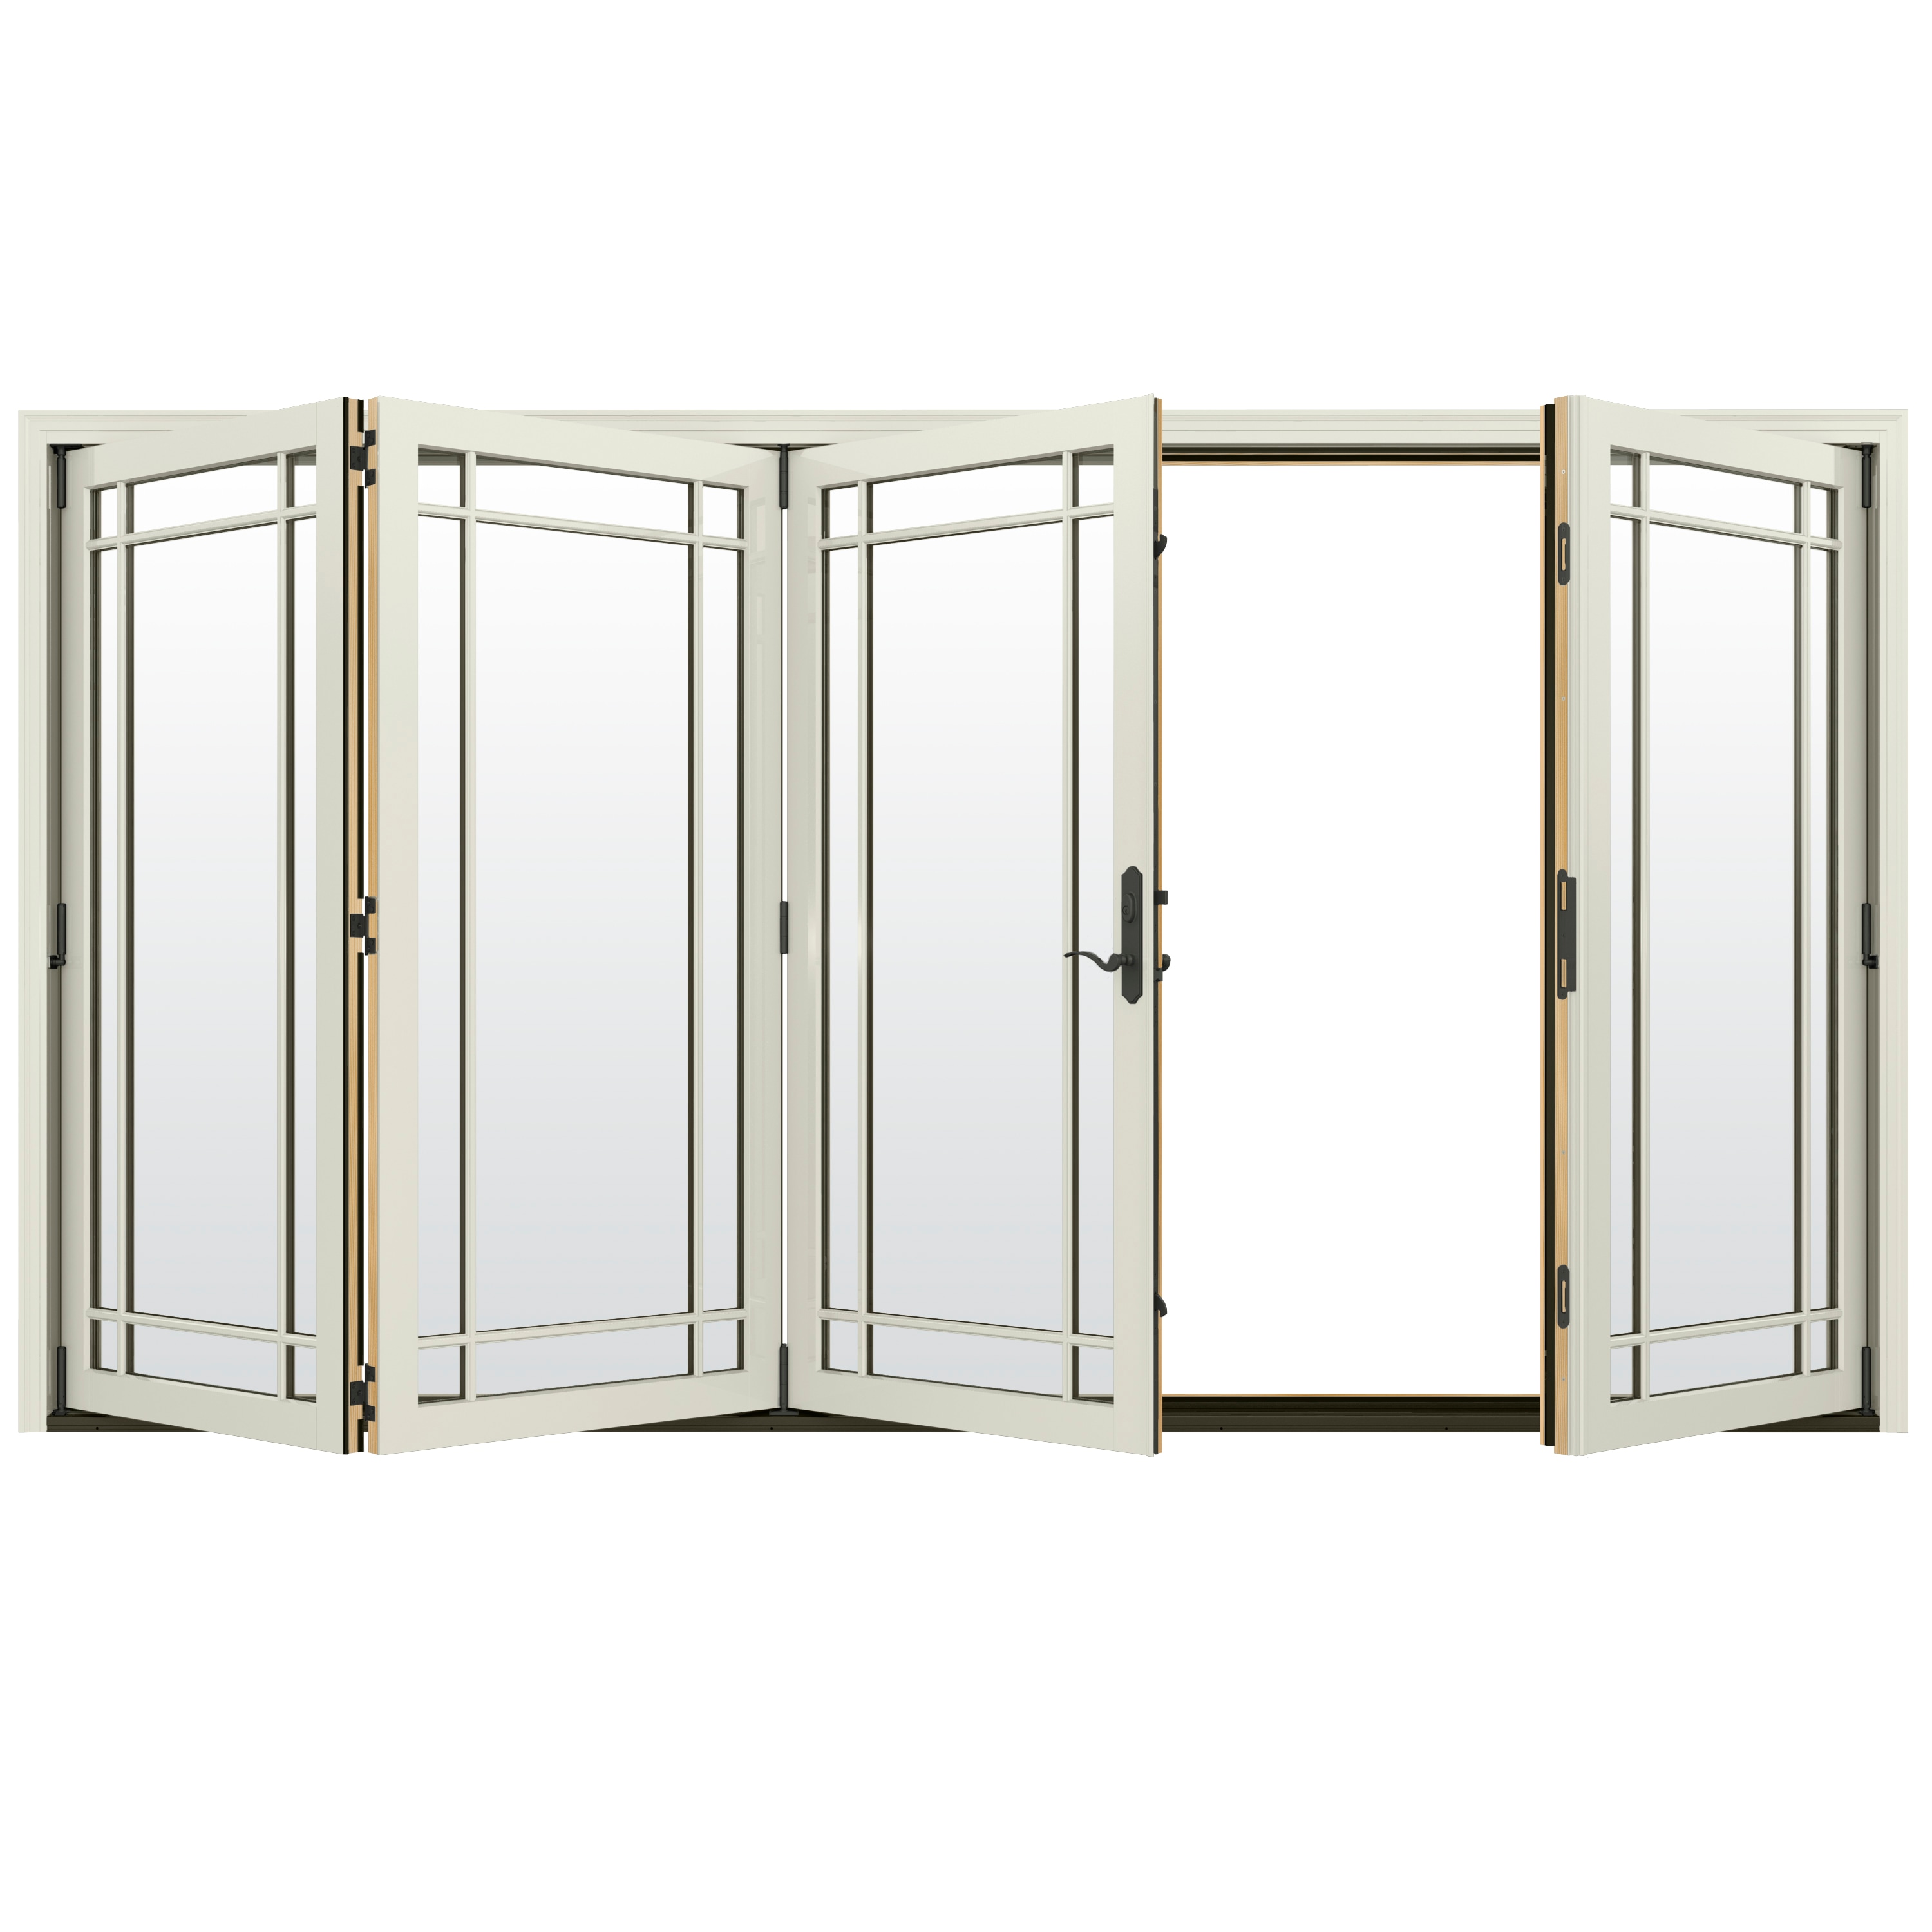 124-in x 96-in Low-e Argon Simulated Divided Light Vanilla Clad-wood Folding Left-Hand Outswing Patio Door in Off-White | - JELD-WEN LOWOLJW247800067